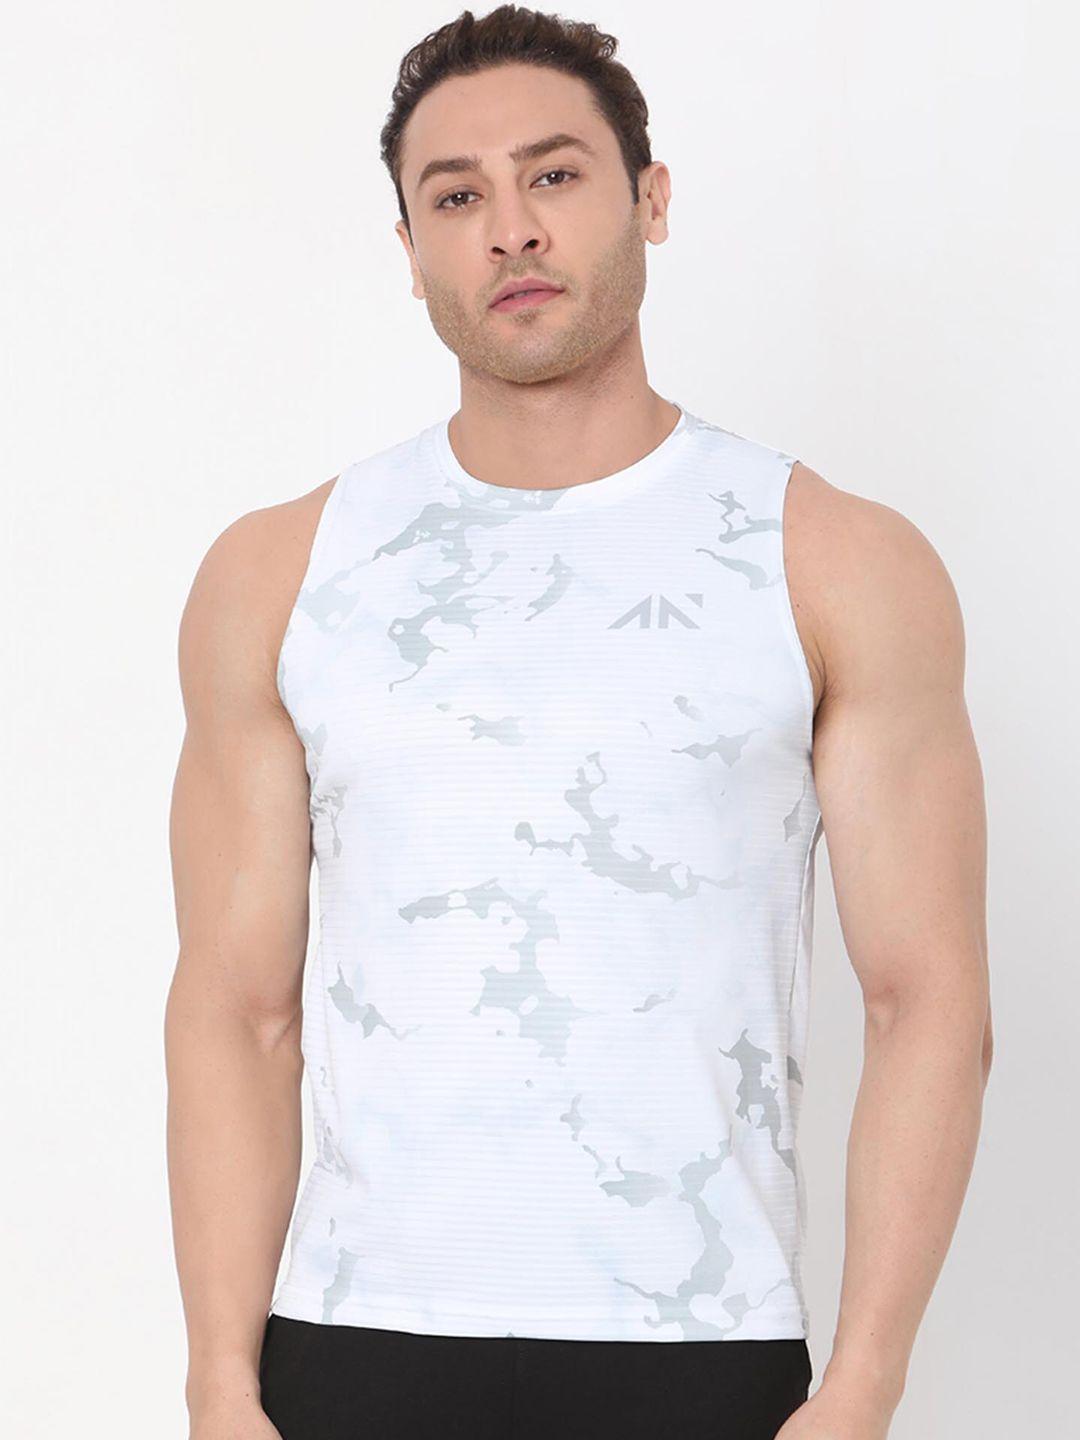 aesthetic nation white printed innerwear vests